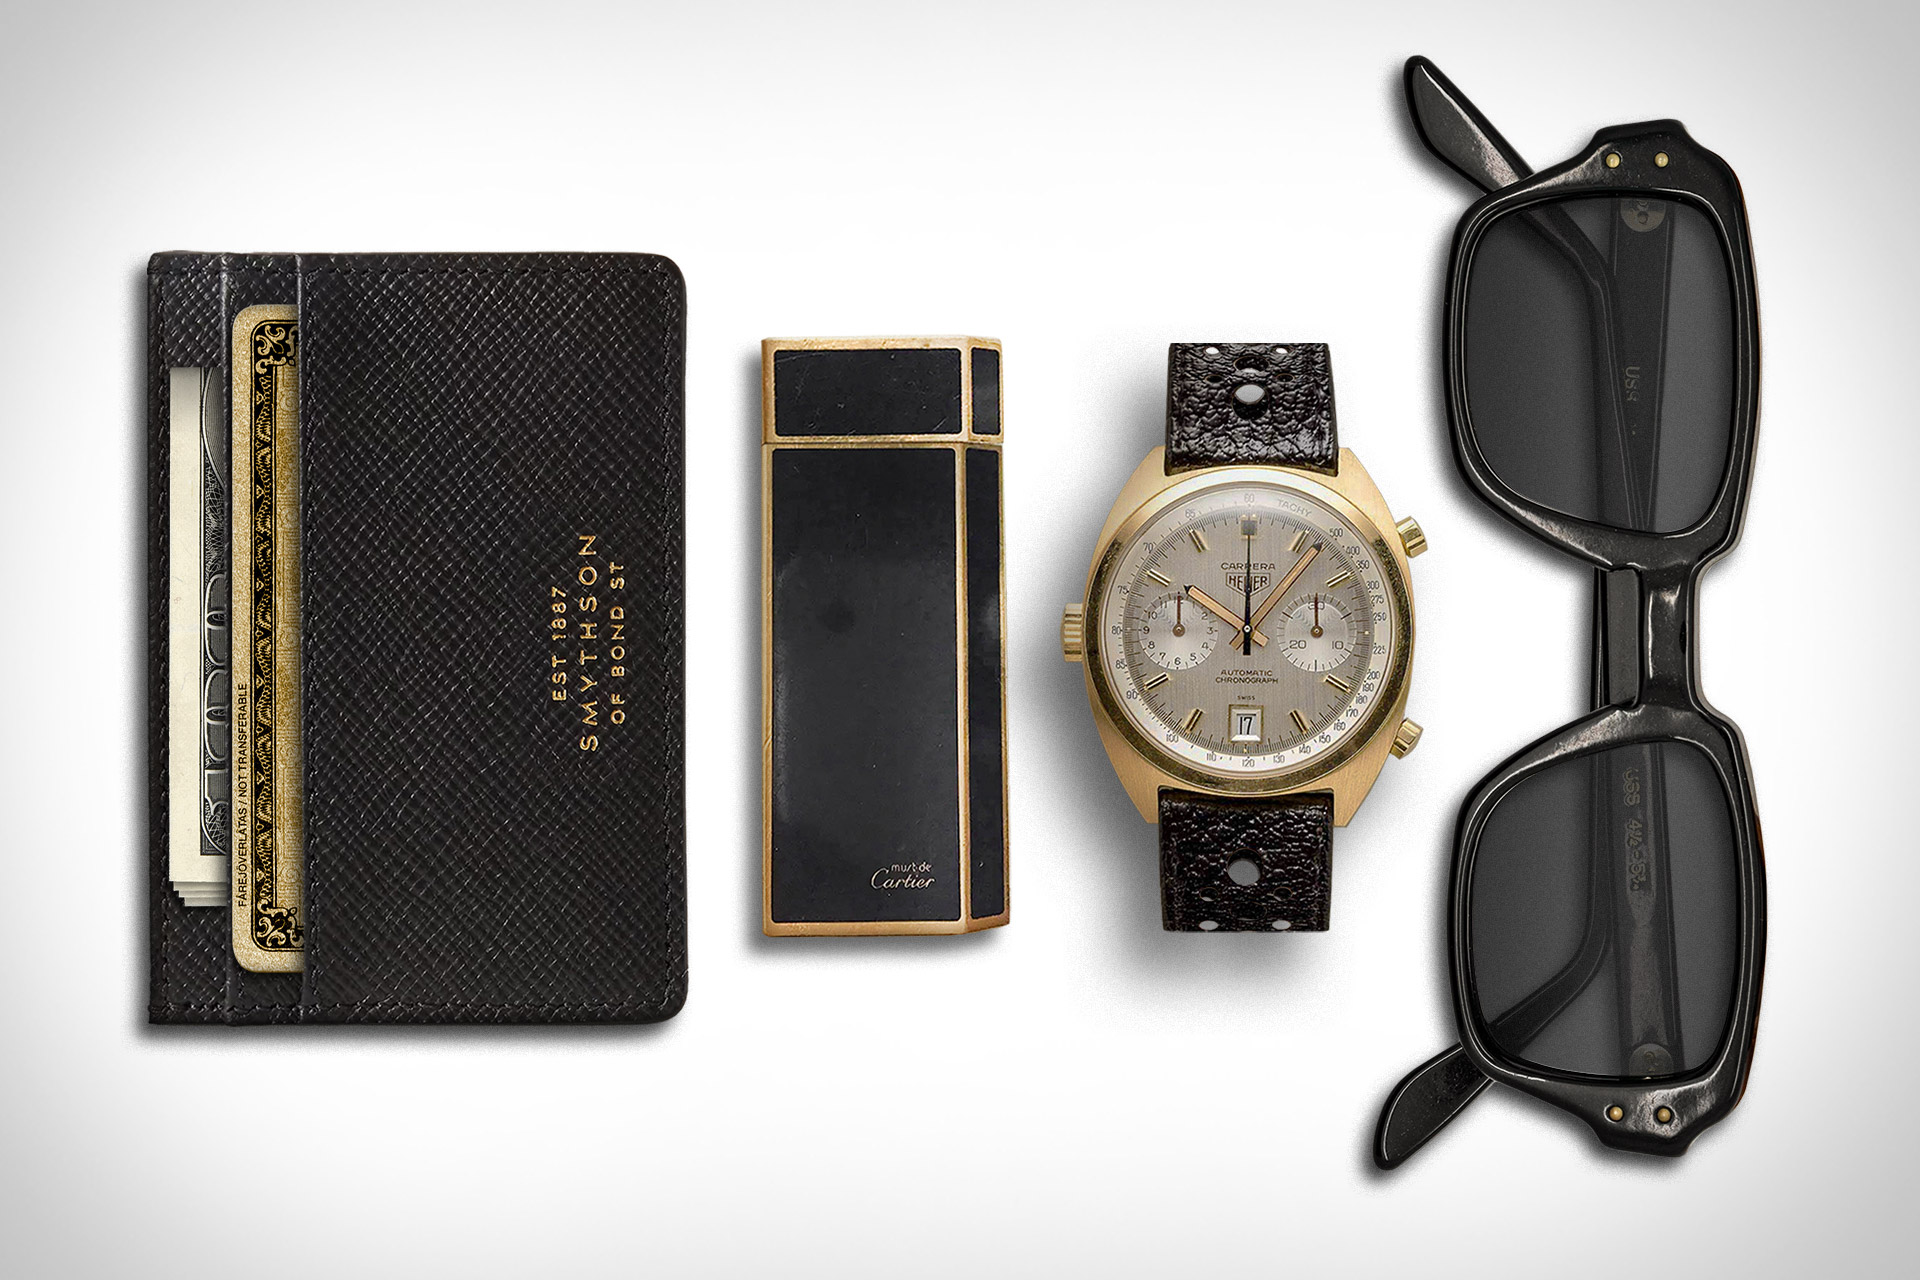 Everyday Carry: Carrera | Uncrate, #Everyday #Carry #Carrera #Uncrate